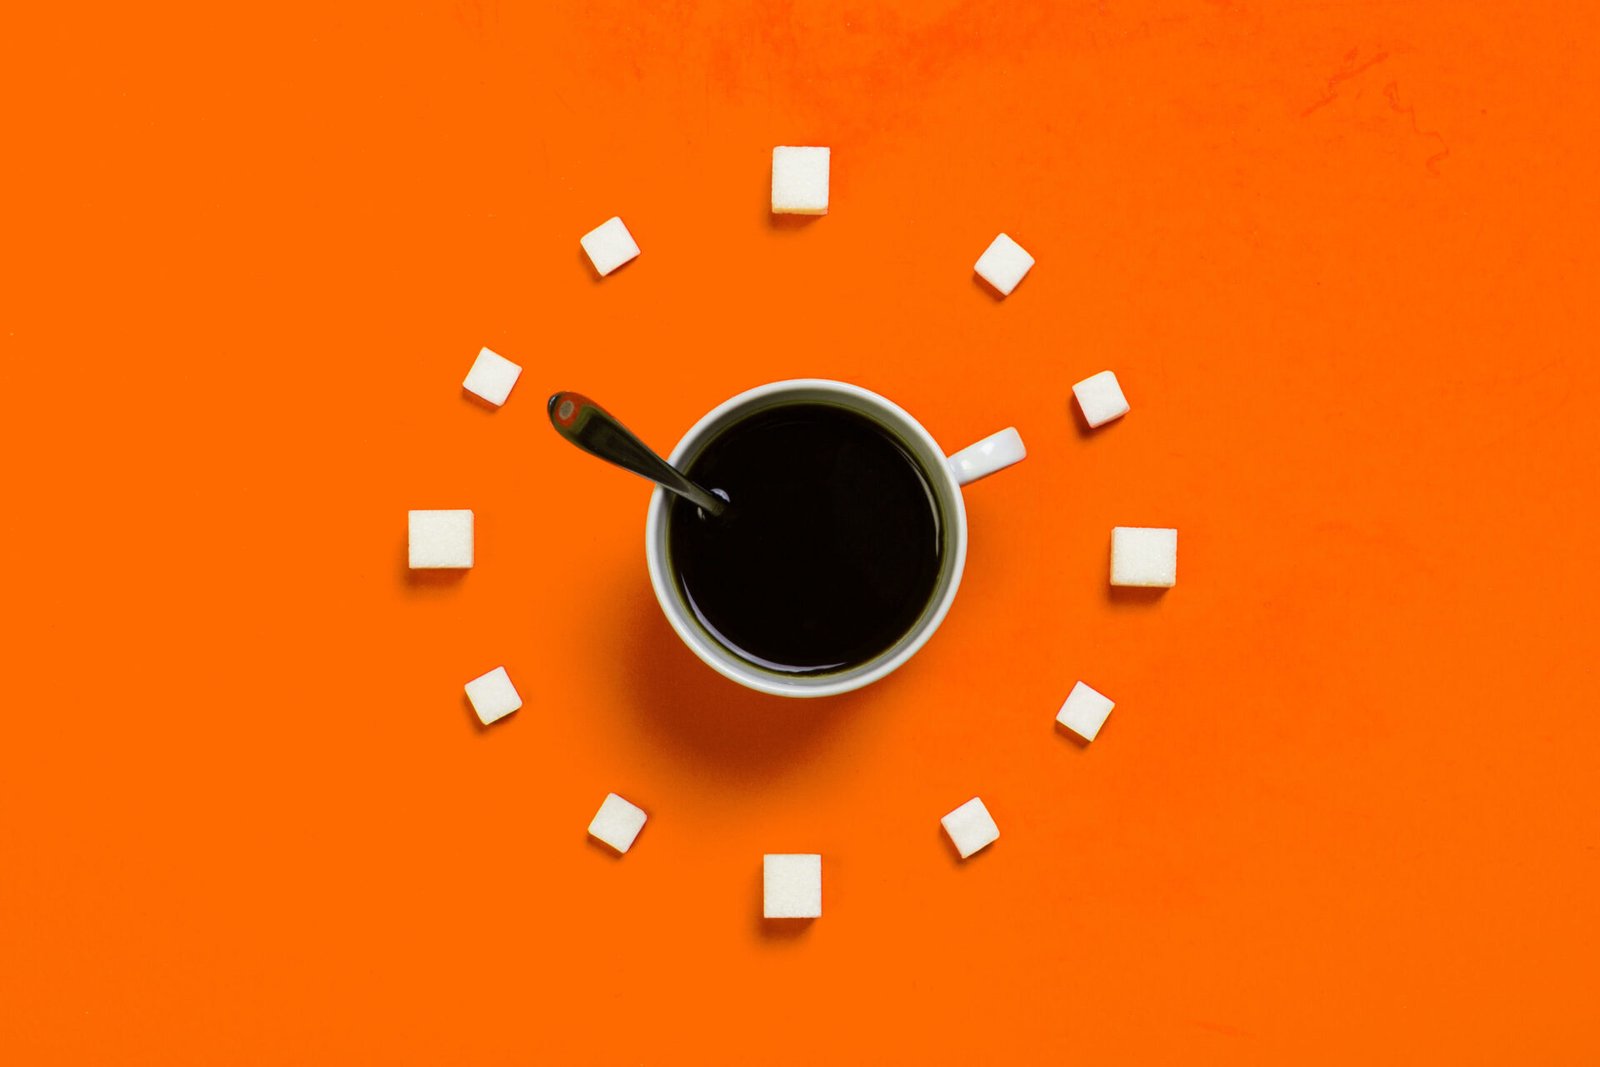 A creative design for Coffee and cube sugars form a clock with orange background